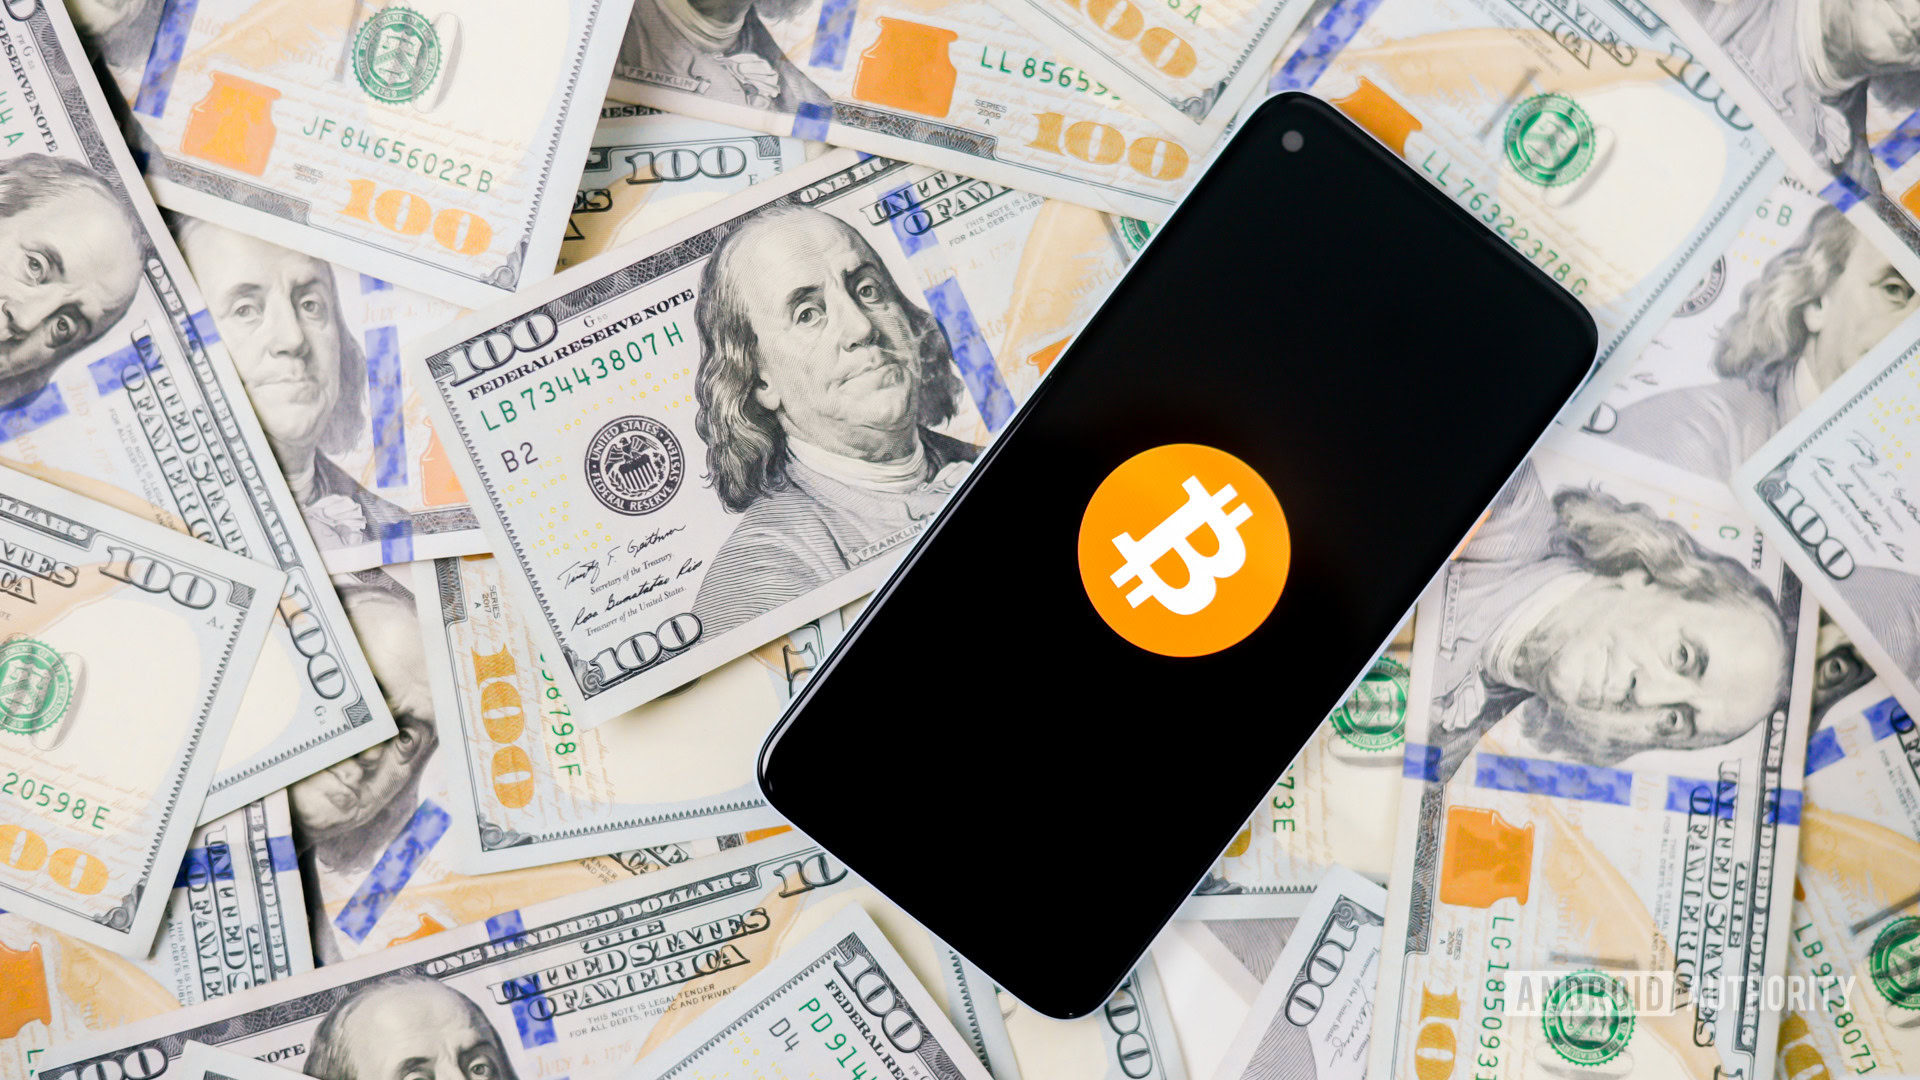 Stock image of the Bitcoin logo on a darkened smartphone screen resting on top of a stack of $100 bills.